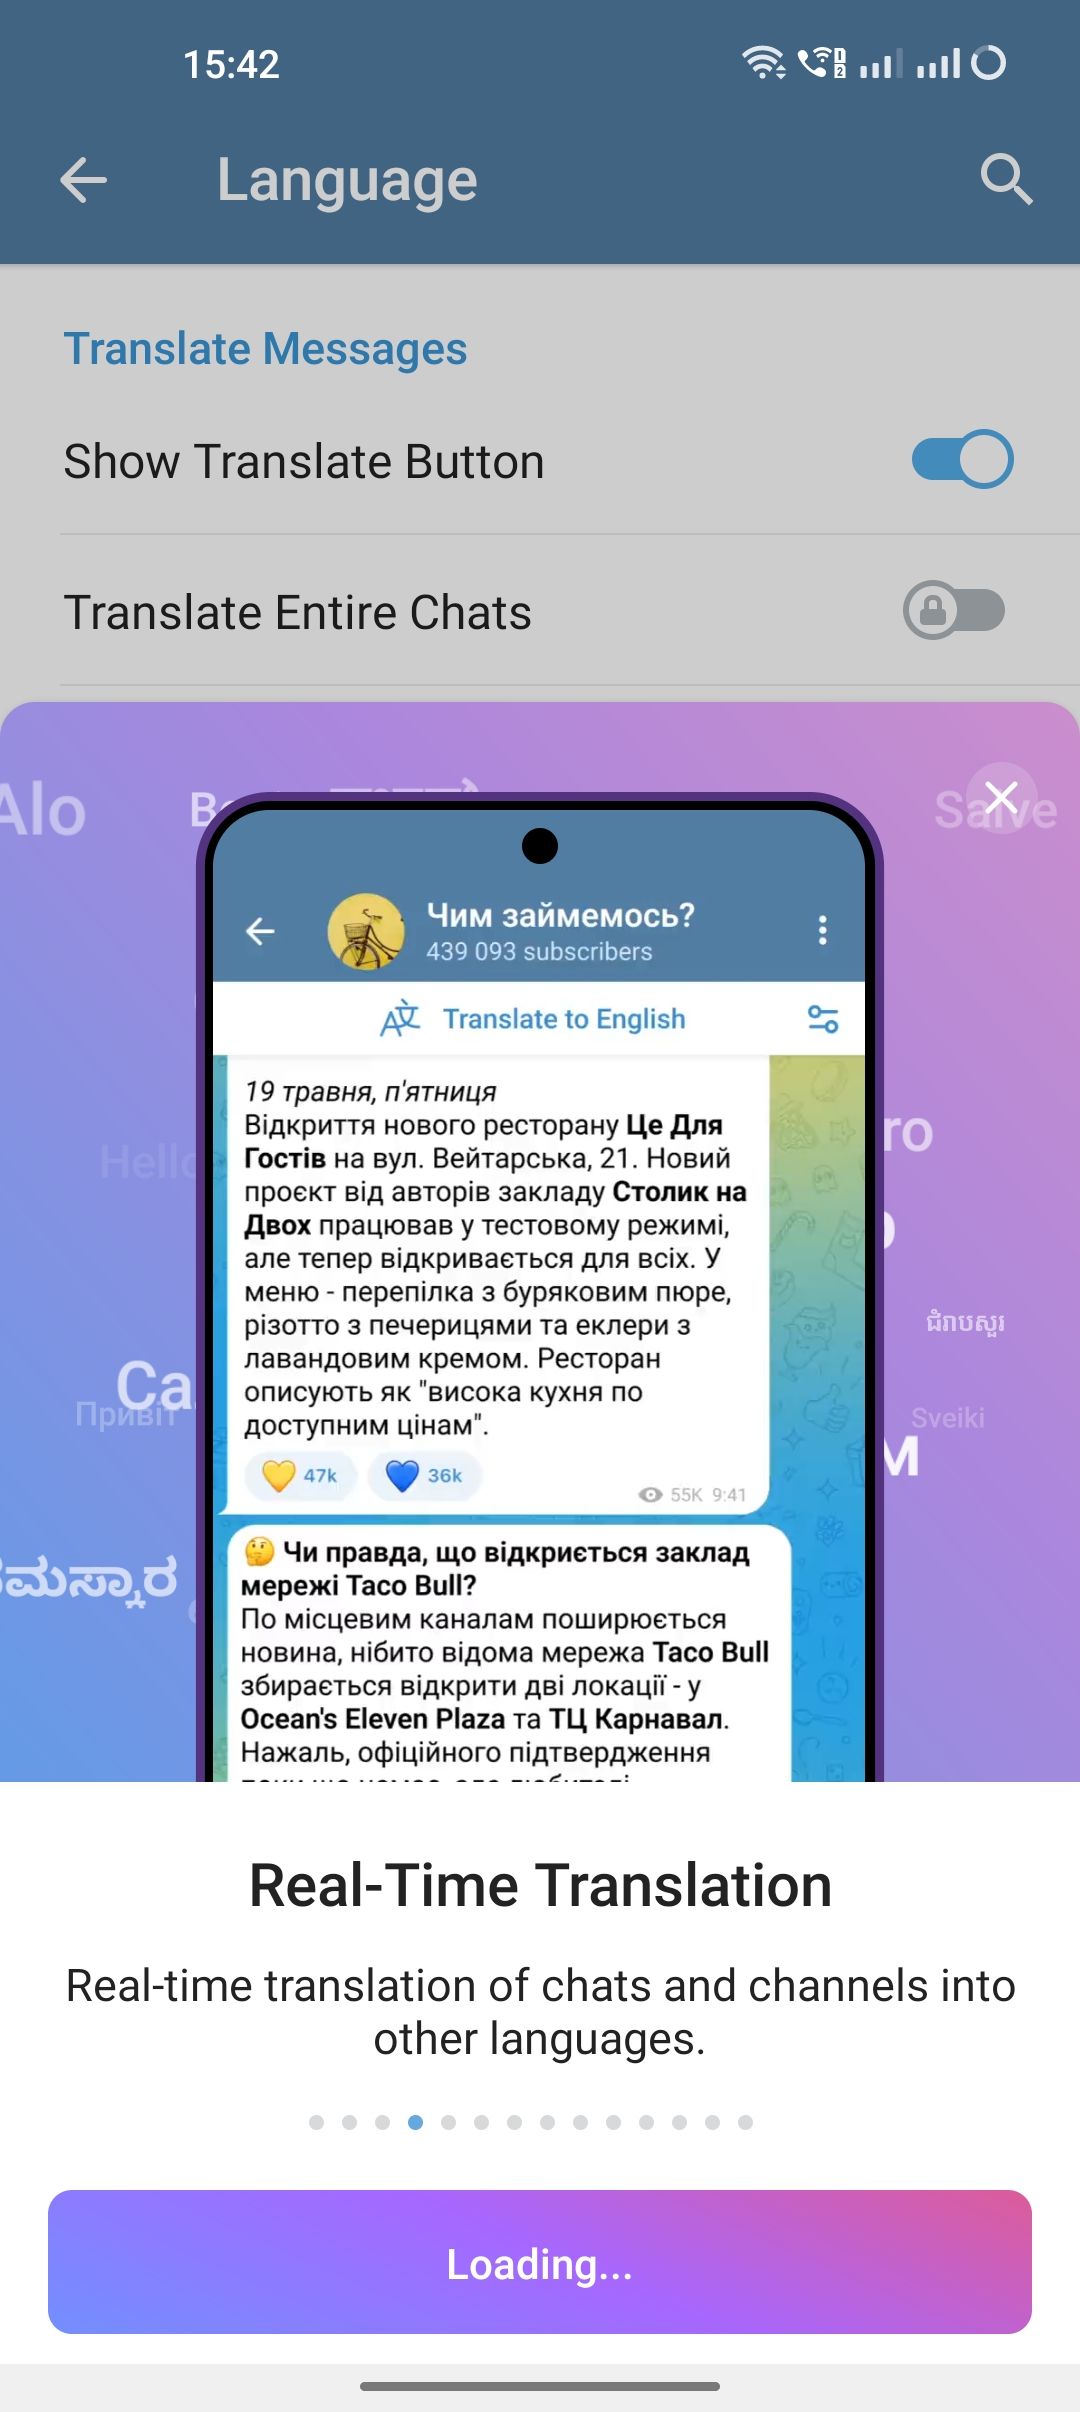 A screenshot of Telegram app's language setting showing the Premium real-time translation feature